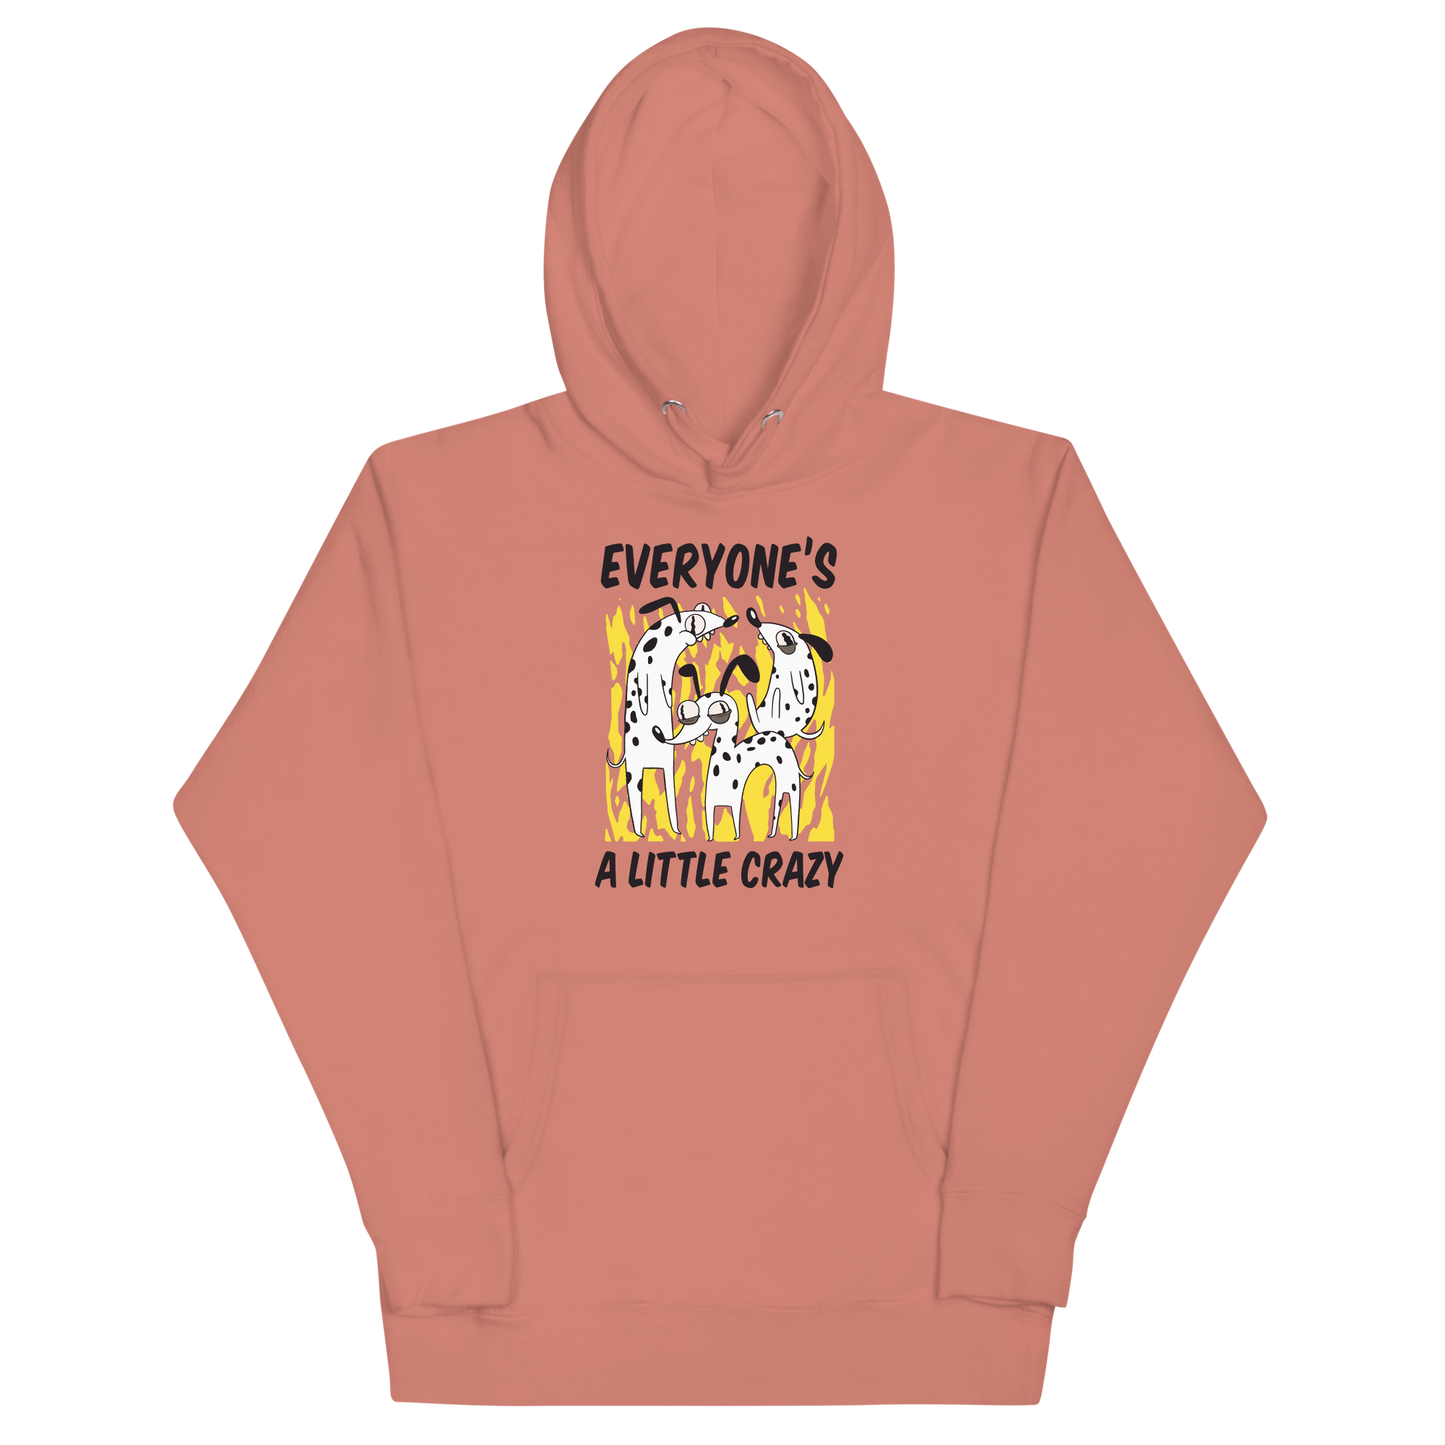 Dusty Rose Premium Dog Hoodie featuring a Everyone's A Little Crazy graphic on the chest - Funny Graphic Dog Hoodies - Boozy Fox